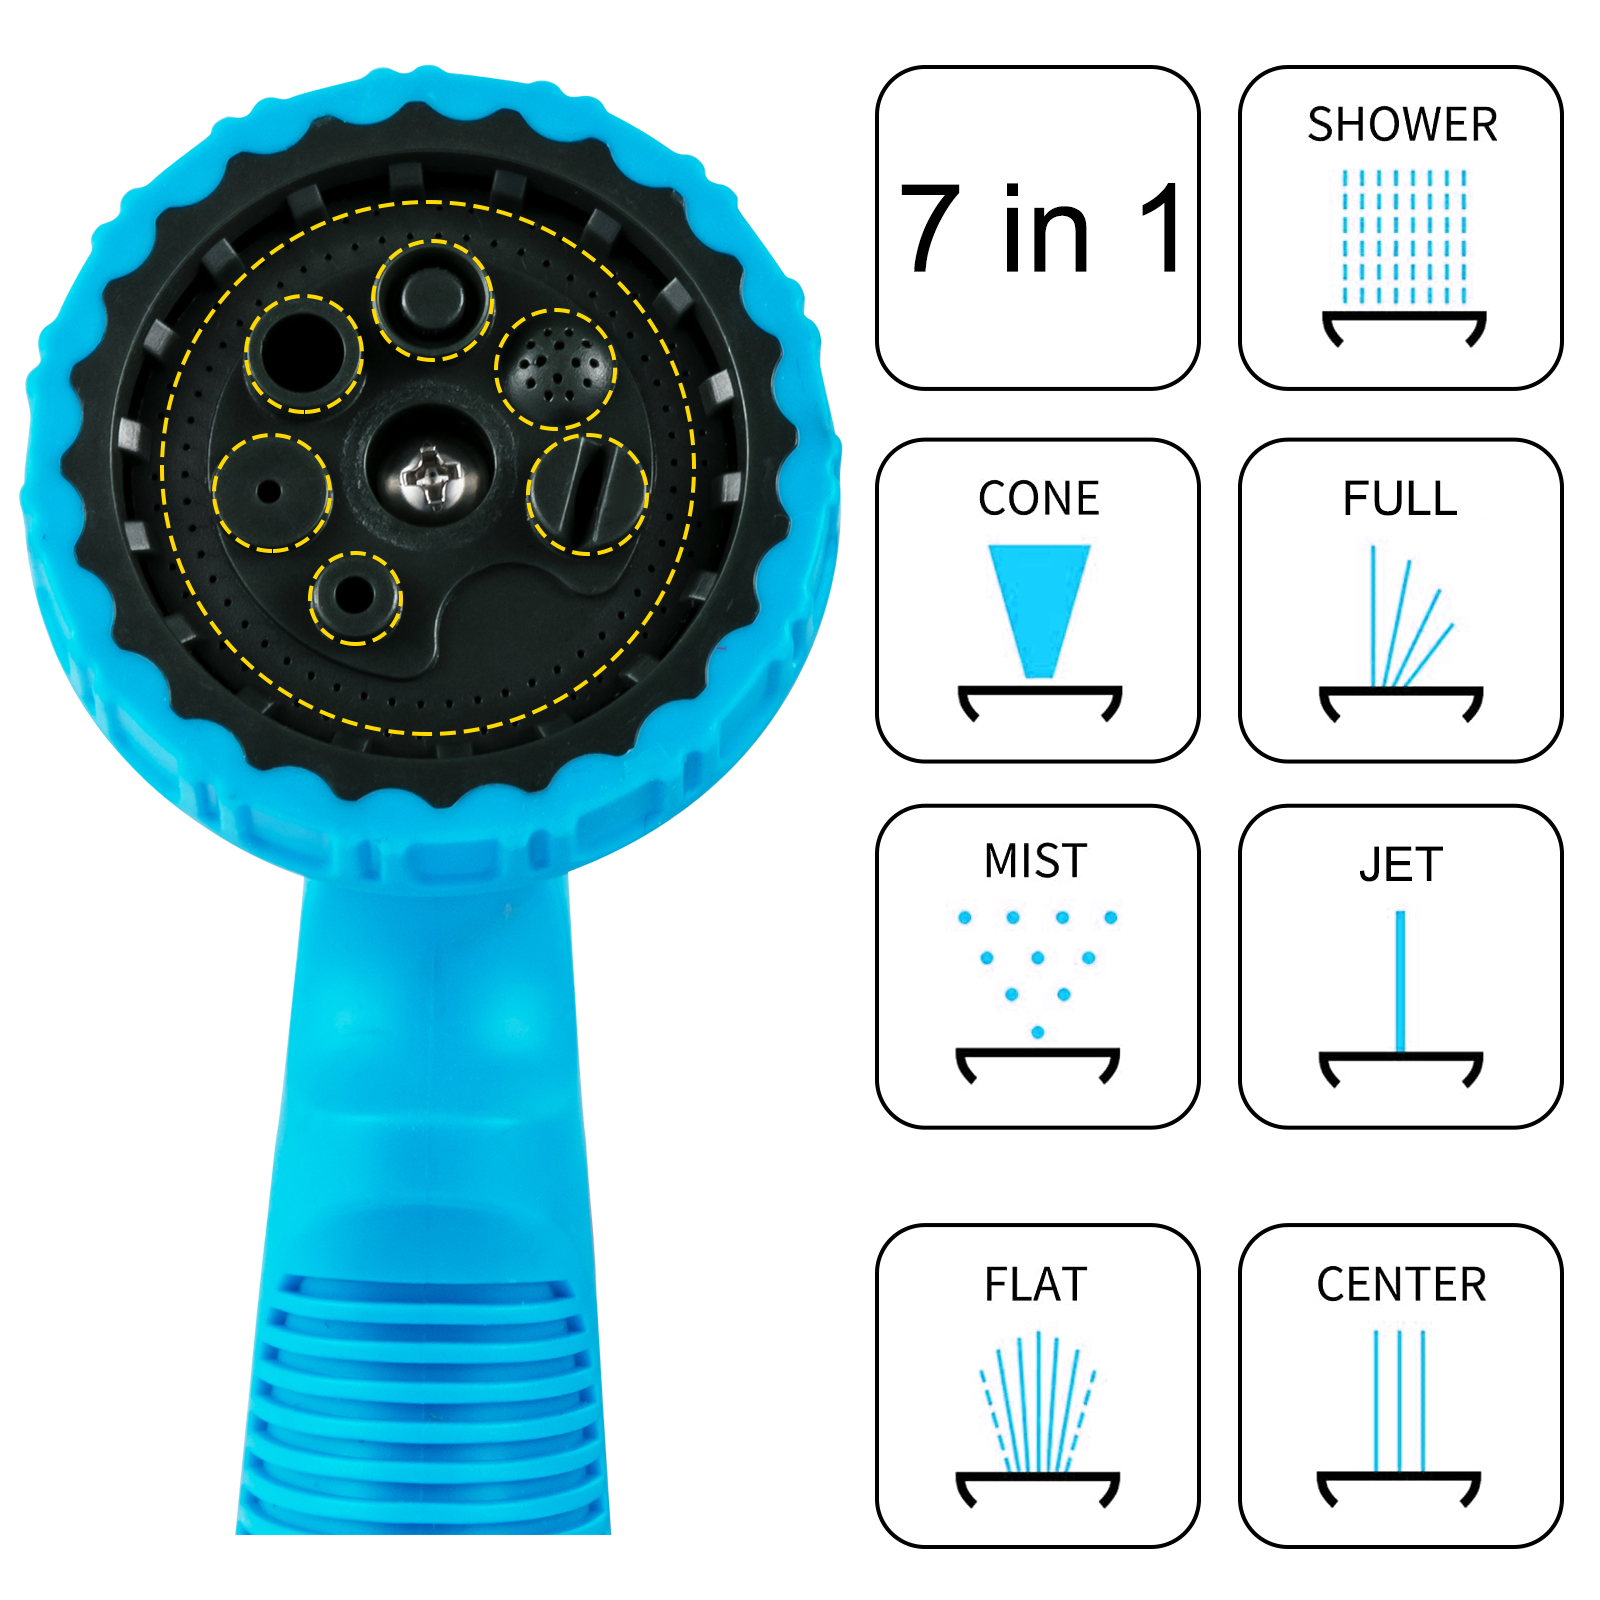 VEVOR Retractable Hose Reel, 5/8 inch x 90 ft, Any Length Lock & Automatic  Rewind Water Hose, Wall Mounted Garden Hose Reel w/ 180° Swivel Bracket and  7 Pattern Hose Nozzle, Blue